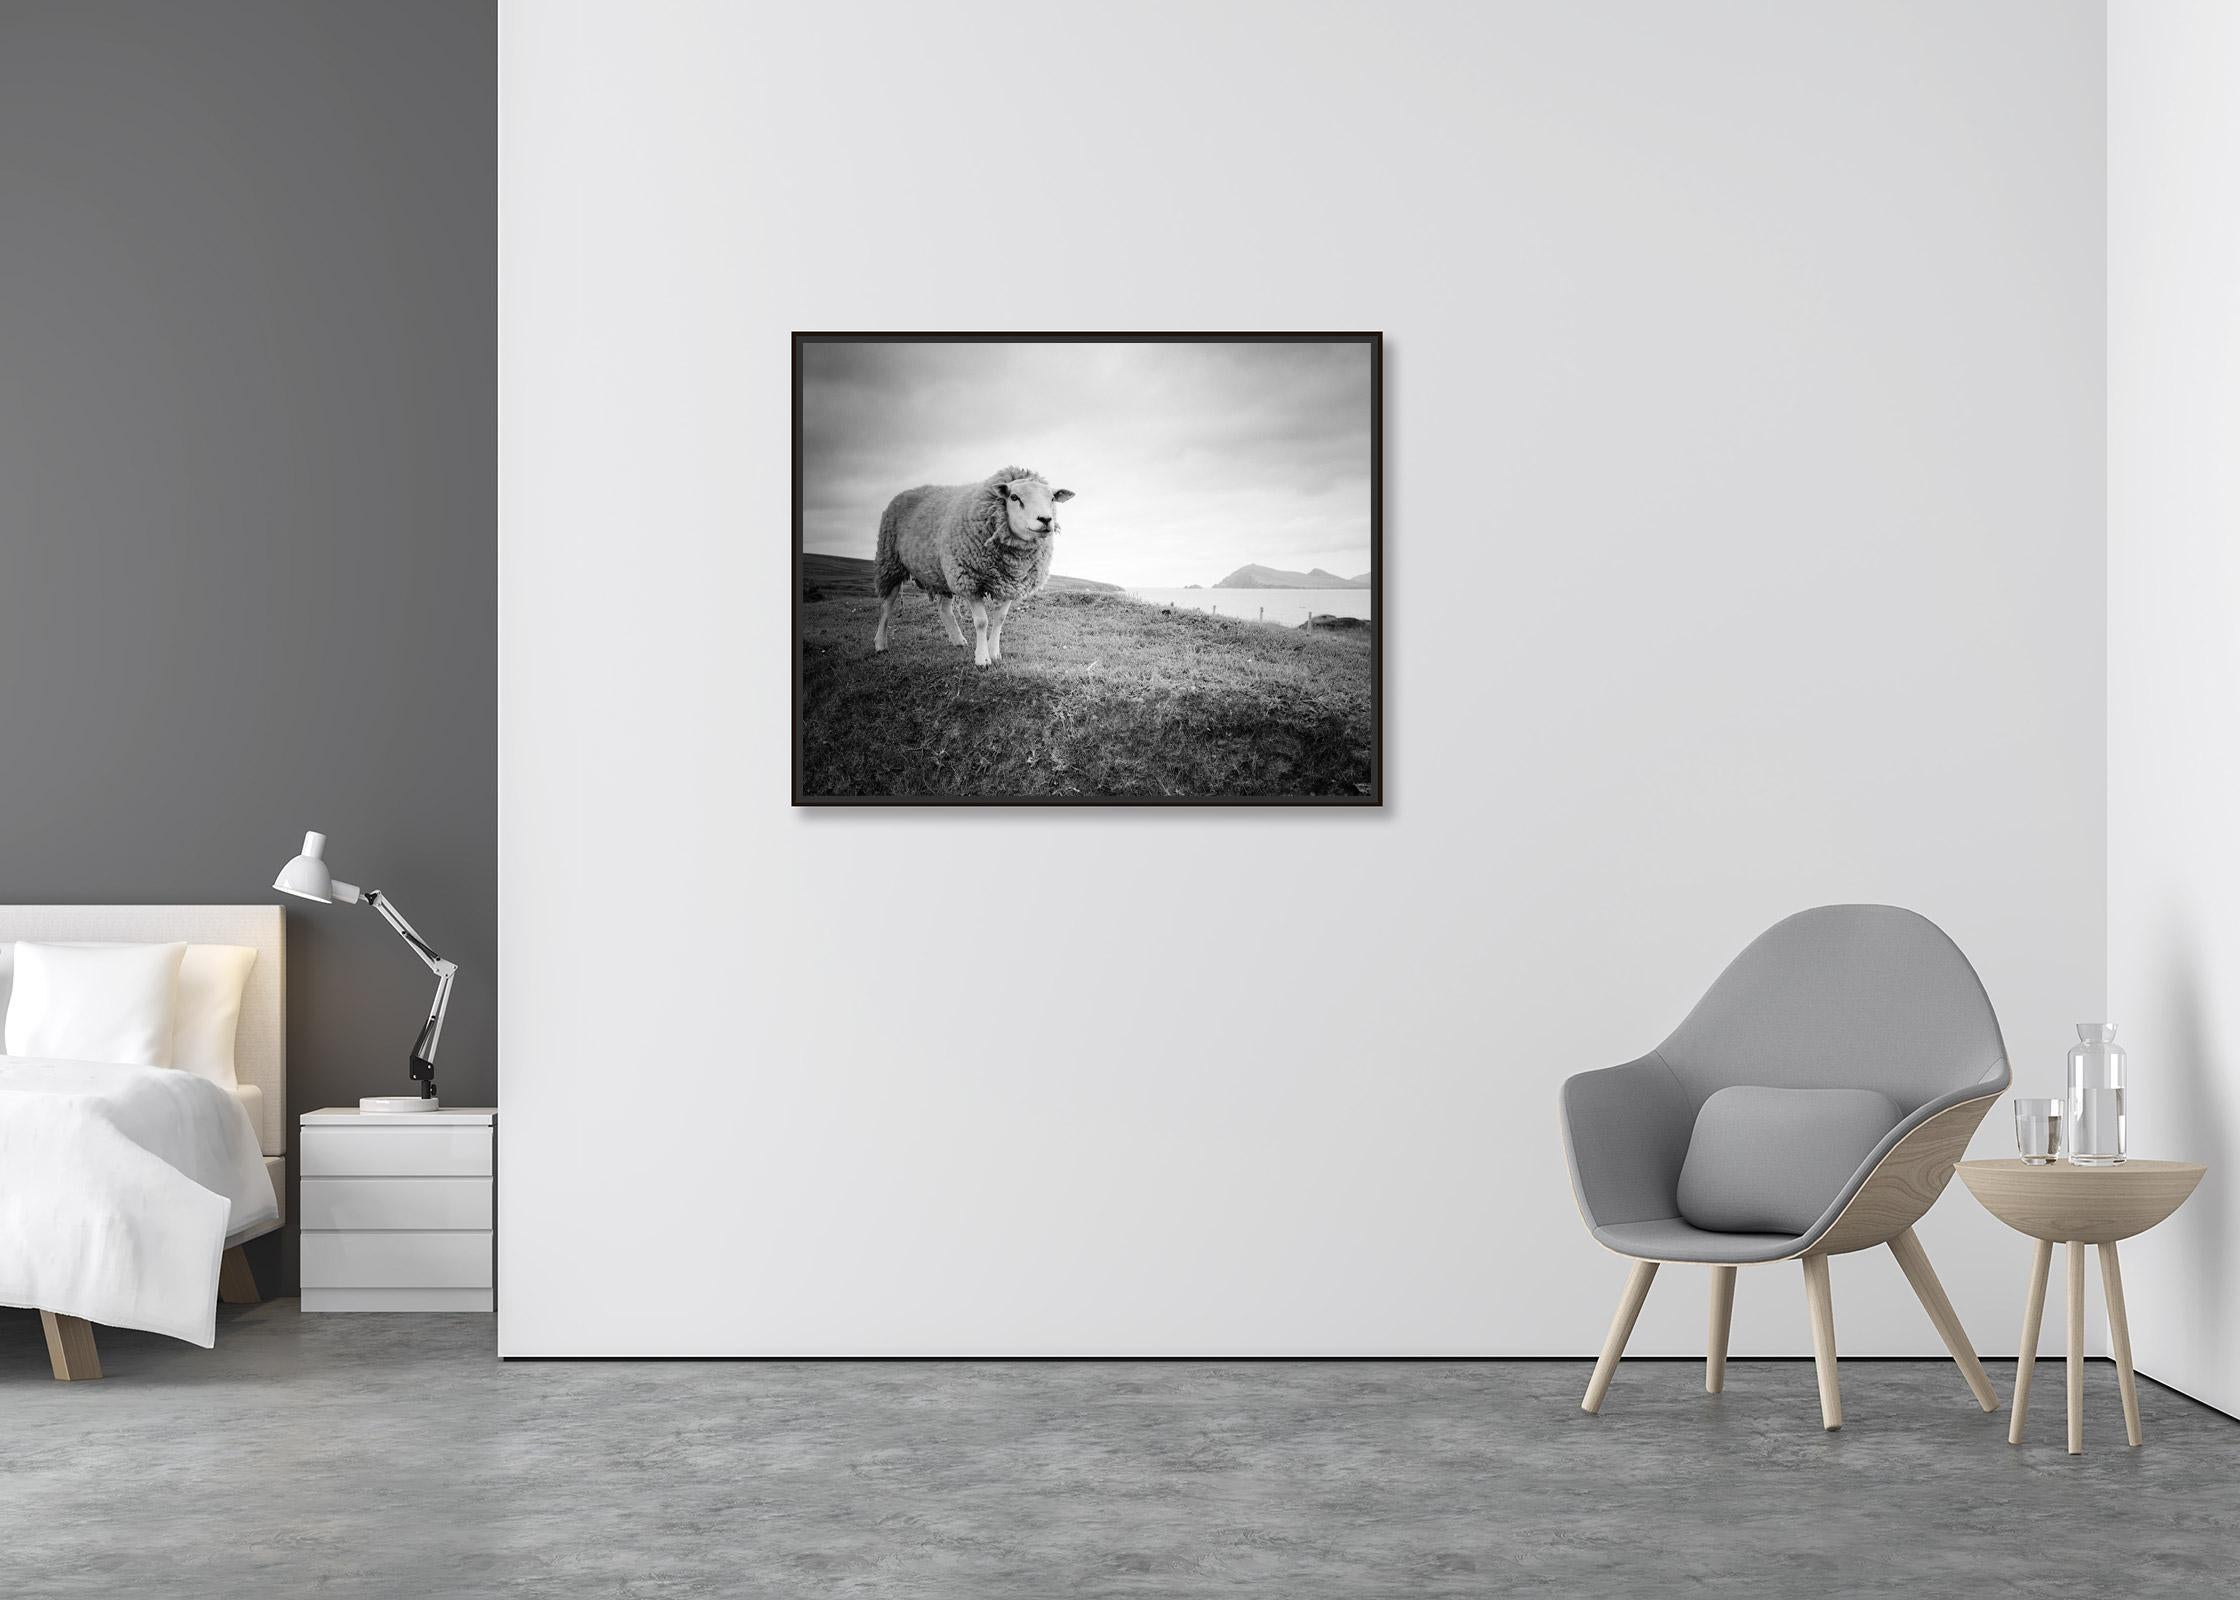 Bucky the Sheep Ireland black and white fine art landscape photography print - Contemporary Photograph by Gerald Berghammer